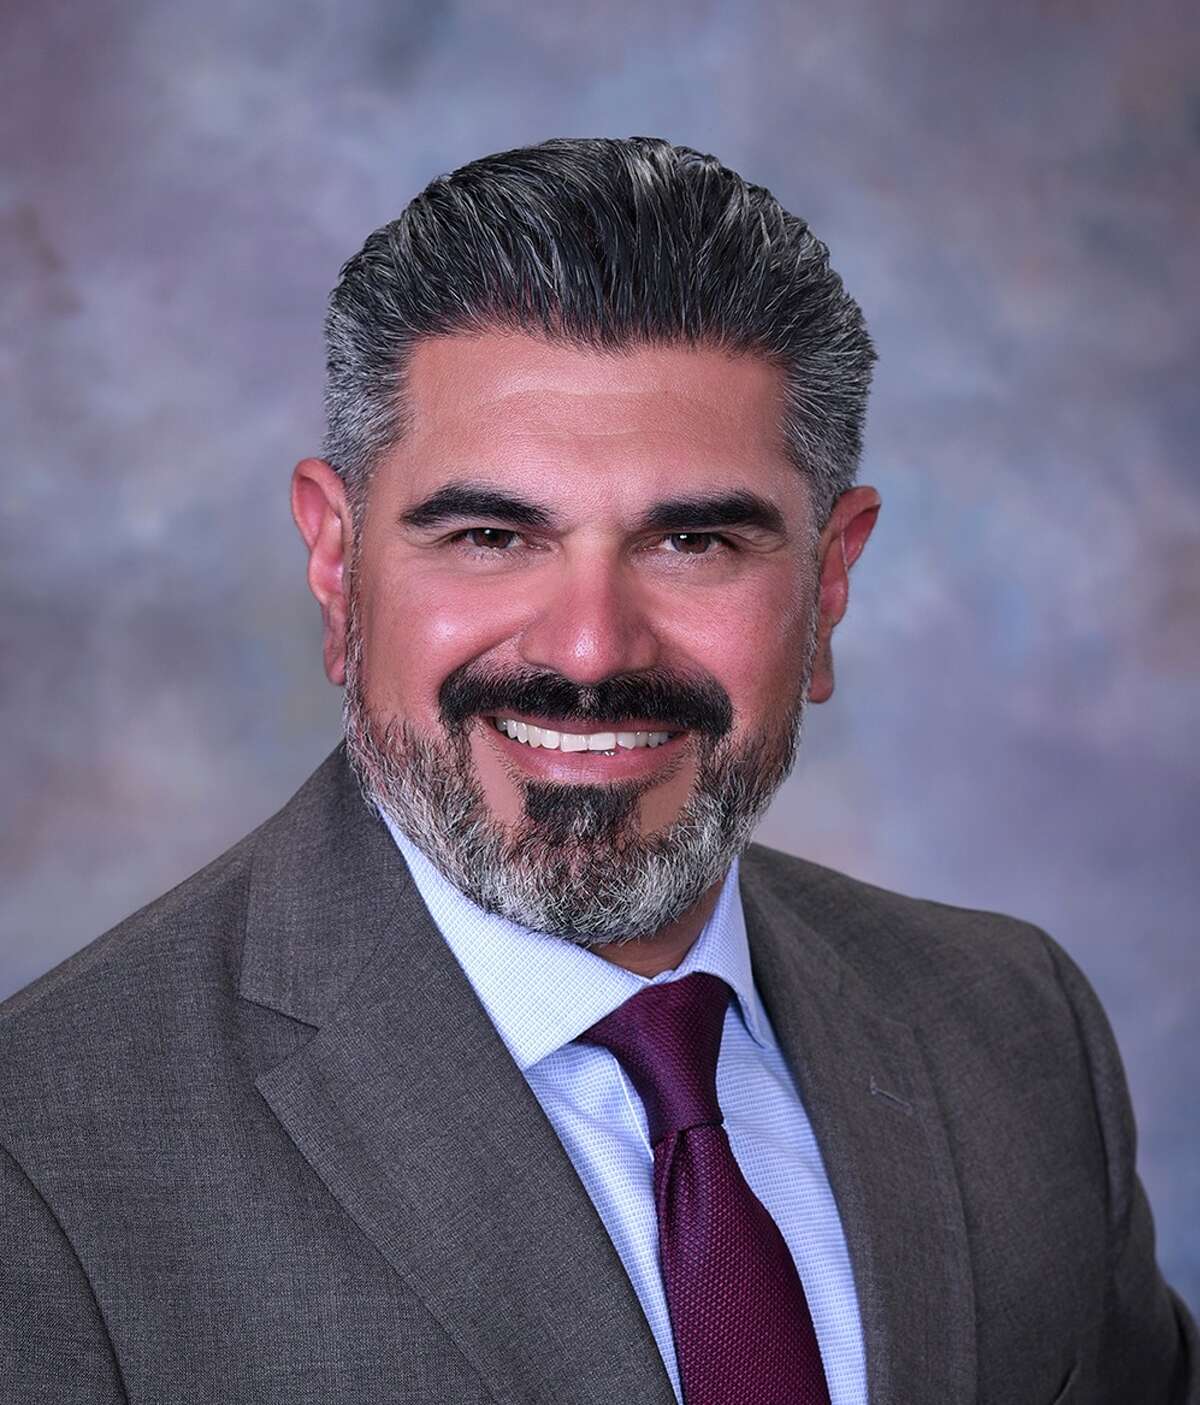 LMC appointed Marco A. Rodriguez its Chief Financial Officer on May 16, 2022.